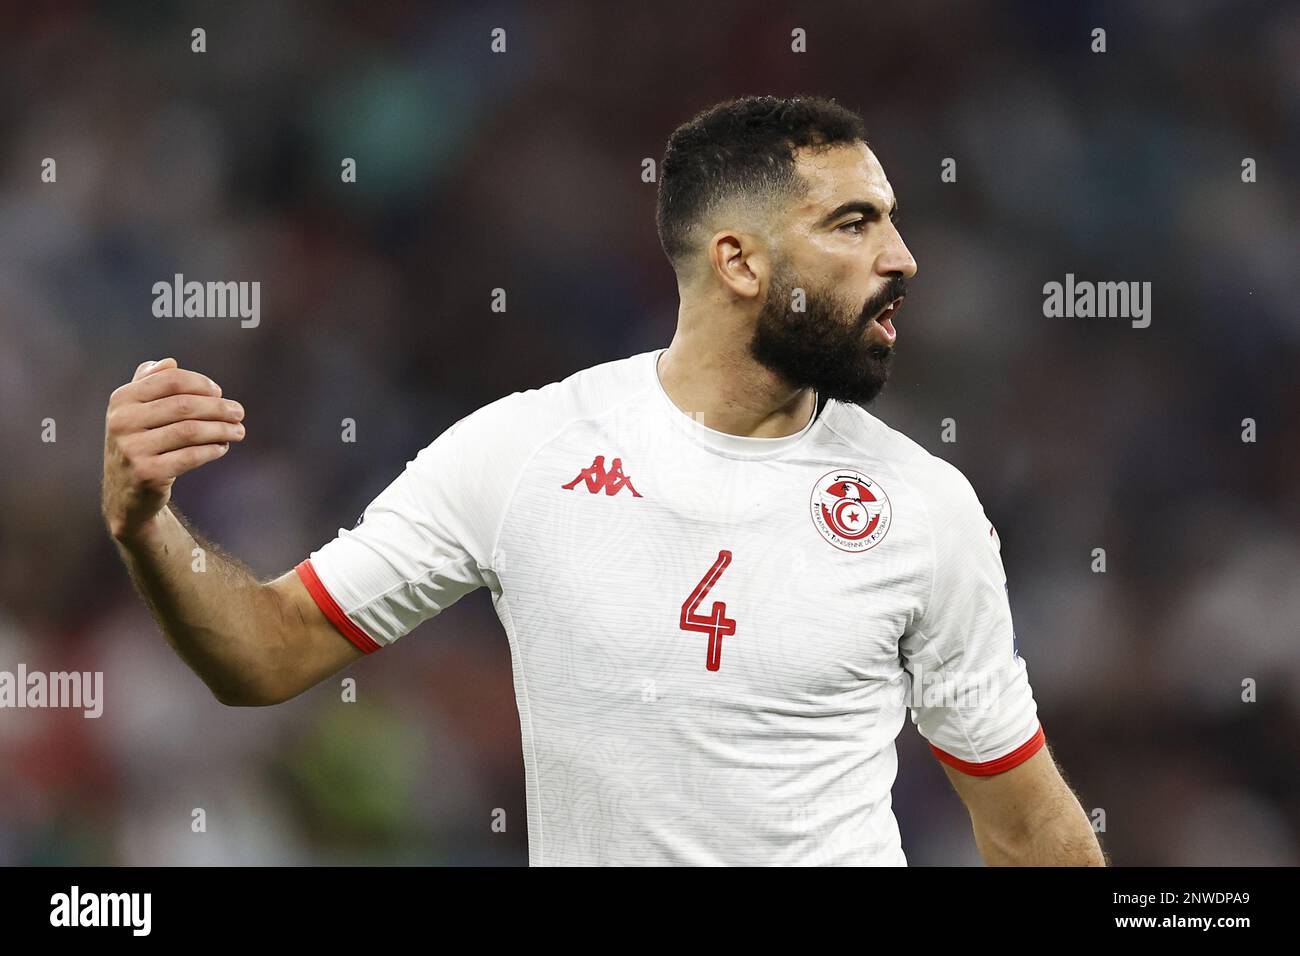 DOHA - Yassine Meriah of Tunisia during the FIFA World Cup Qatar 2022 group C match between Tunisia and France at Education City Stadium on November 30, 2022 in Doha, Qatar. AP | Dutch Height | MAURICE OF STONE Stock Photo